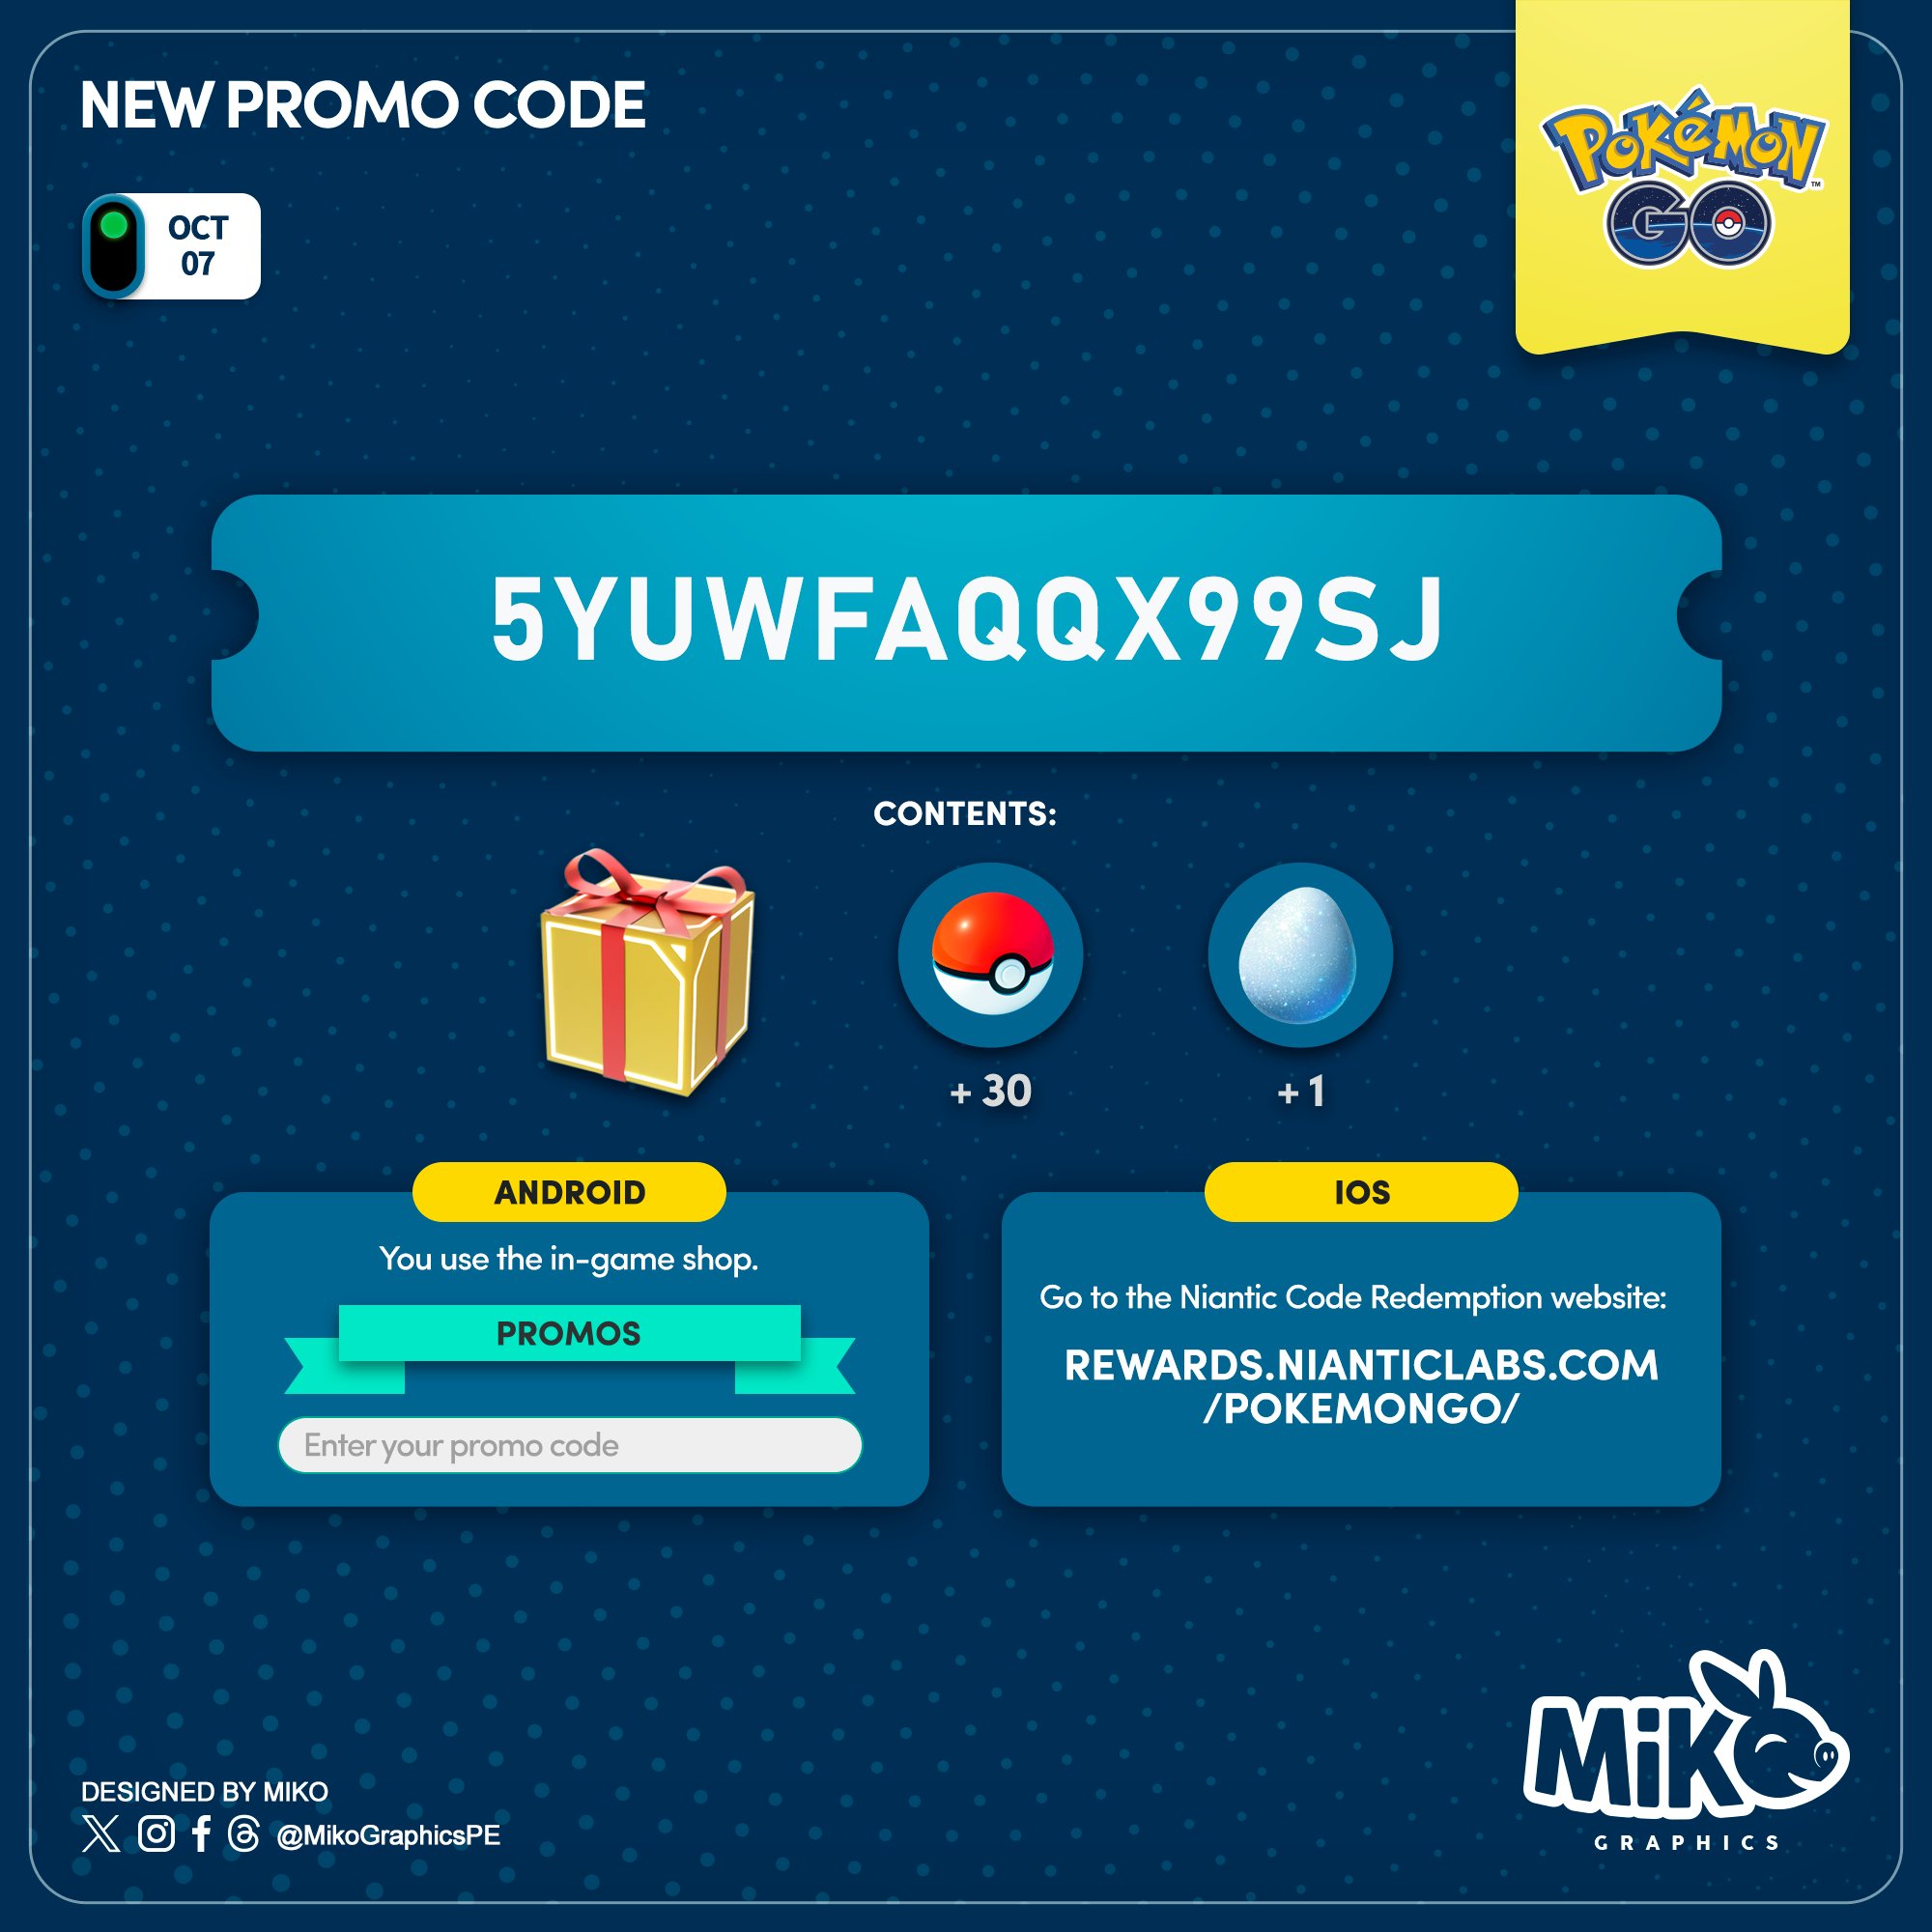 POKEMON GO PROMO CODES ARE HERE! GET YOURS NOW! 😜 